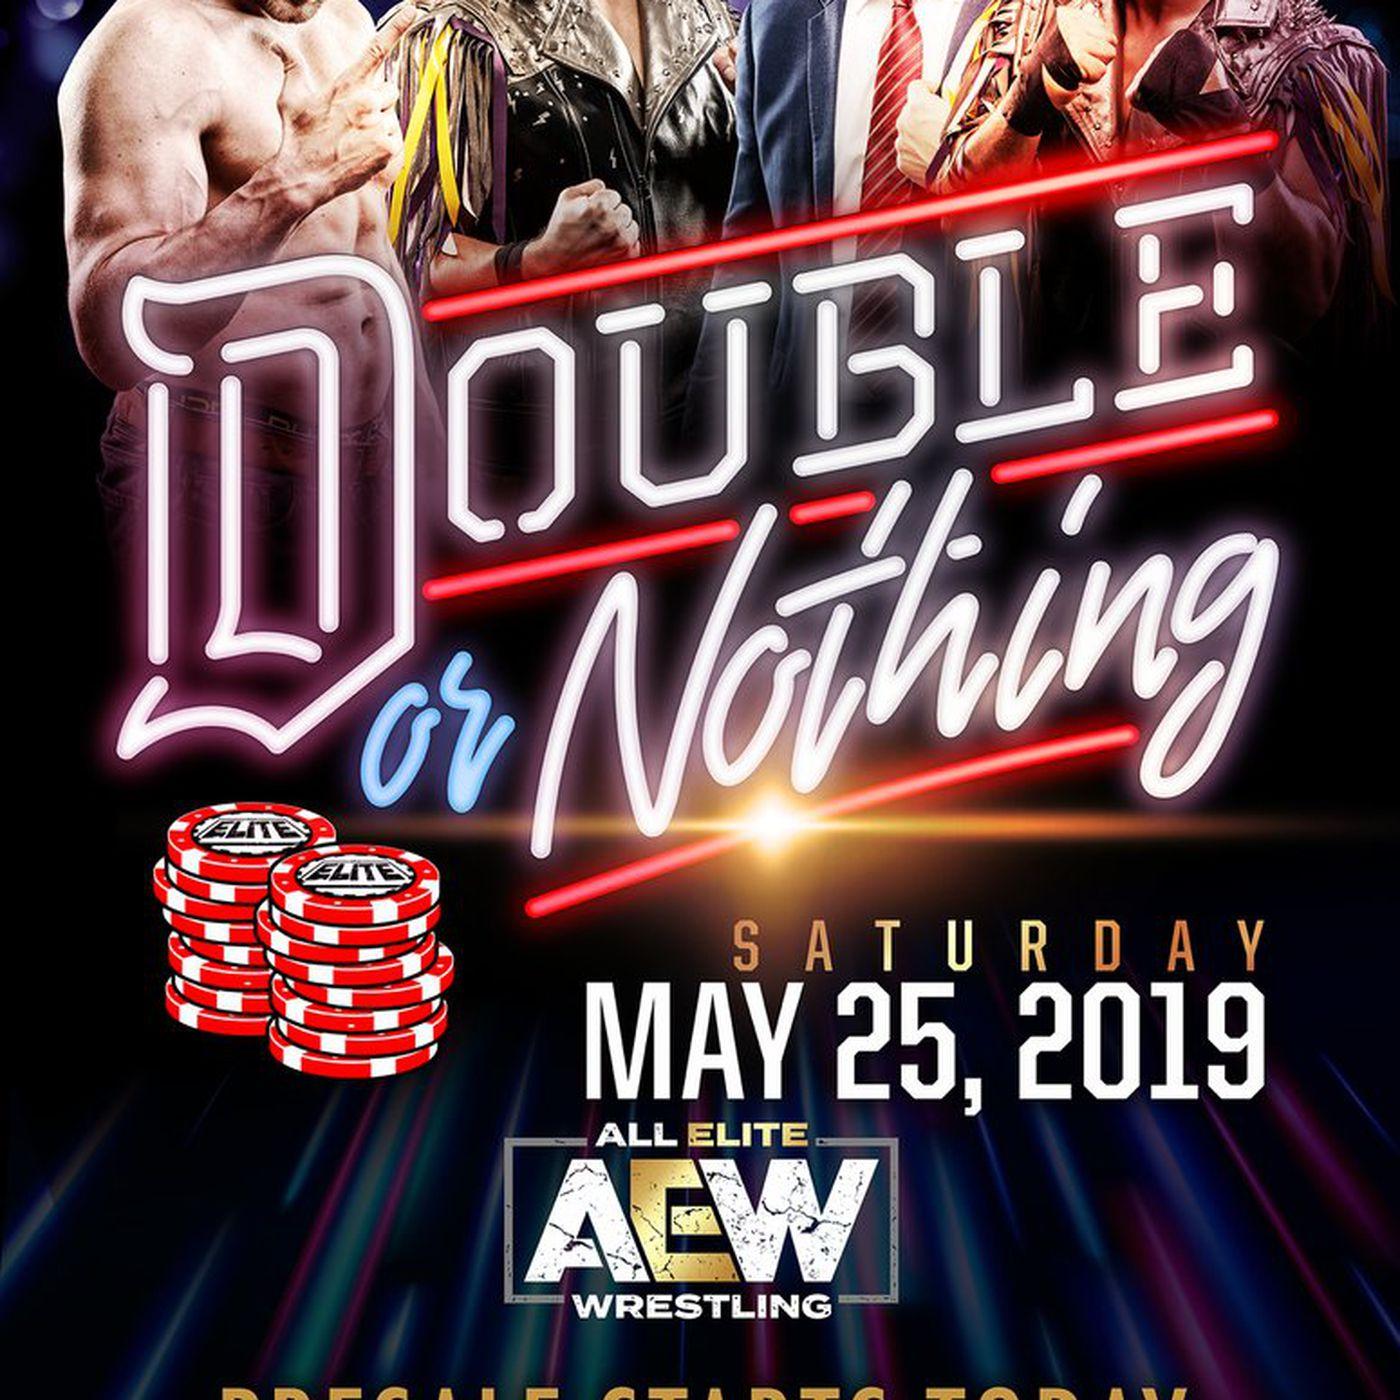 AEW Double Or Nothing Wallpaper